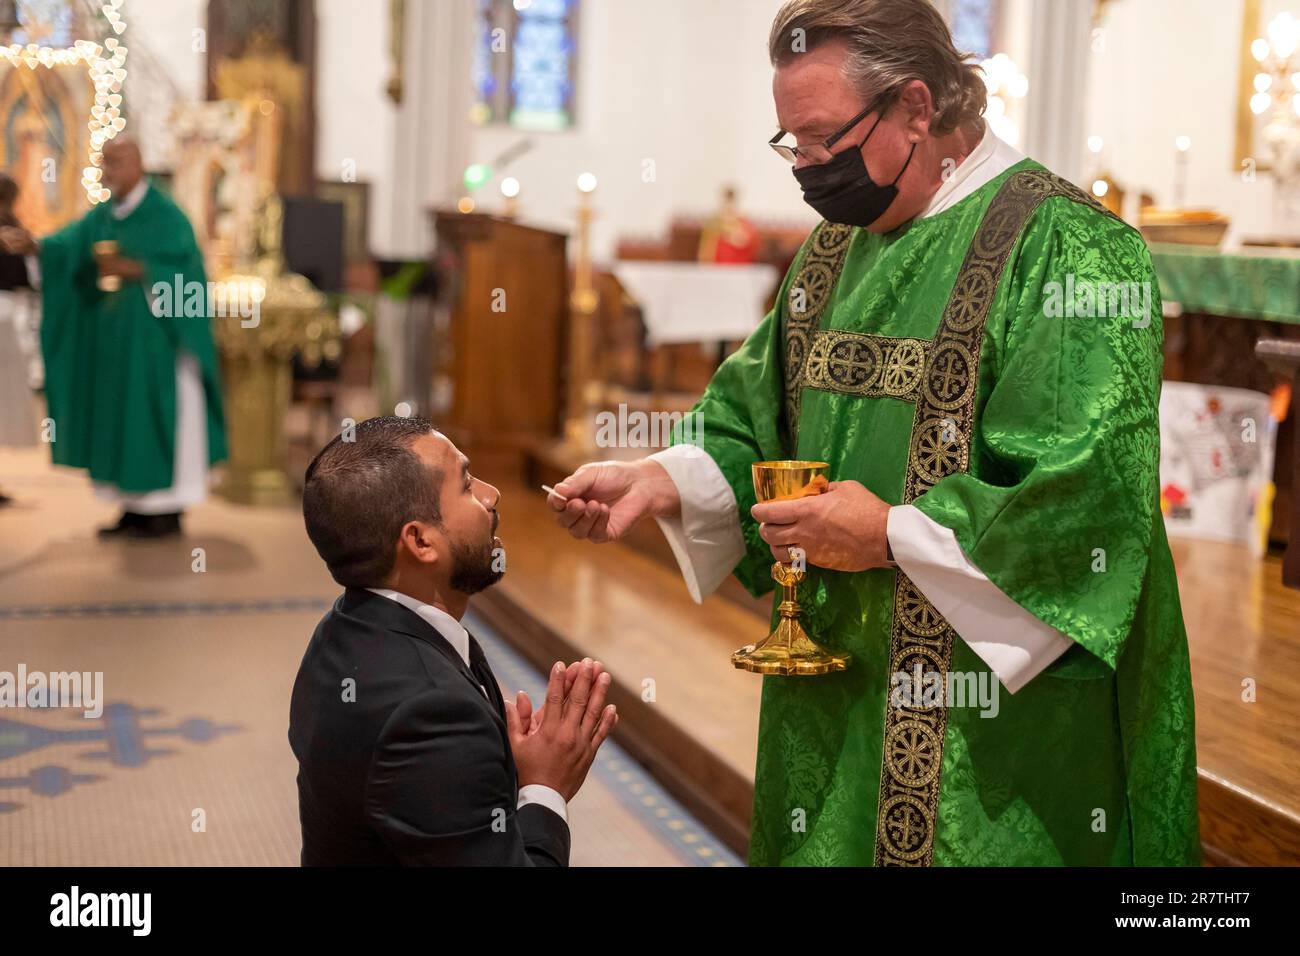 Detroit, Michigan, Msgr. Charles Kosanke gives communion at a mass at Holy Trinity Catholic Church in support of immigrants around the world. The Stock Photo